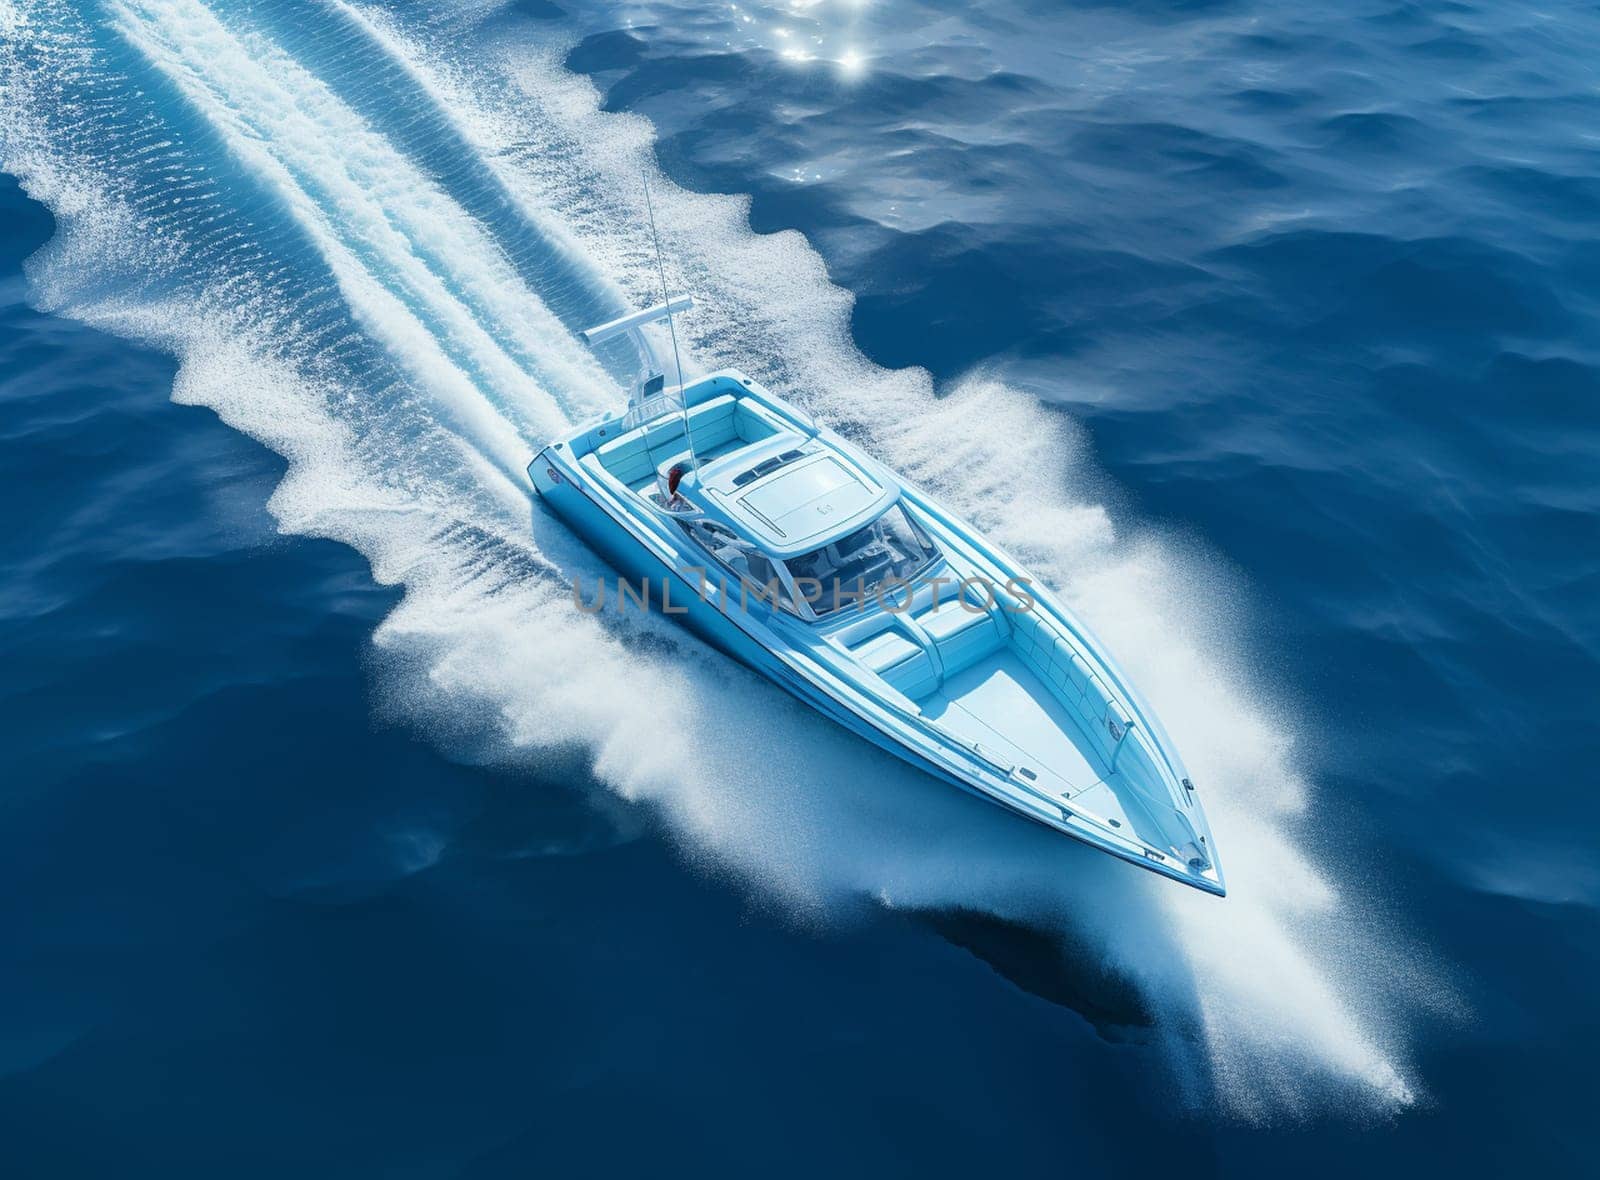 Speed boat movement at high speed aerial view. High-speed yacht of blue color fast motion on blue water in the rays of the sun top view. High quality photo